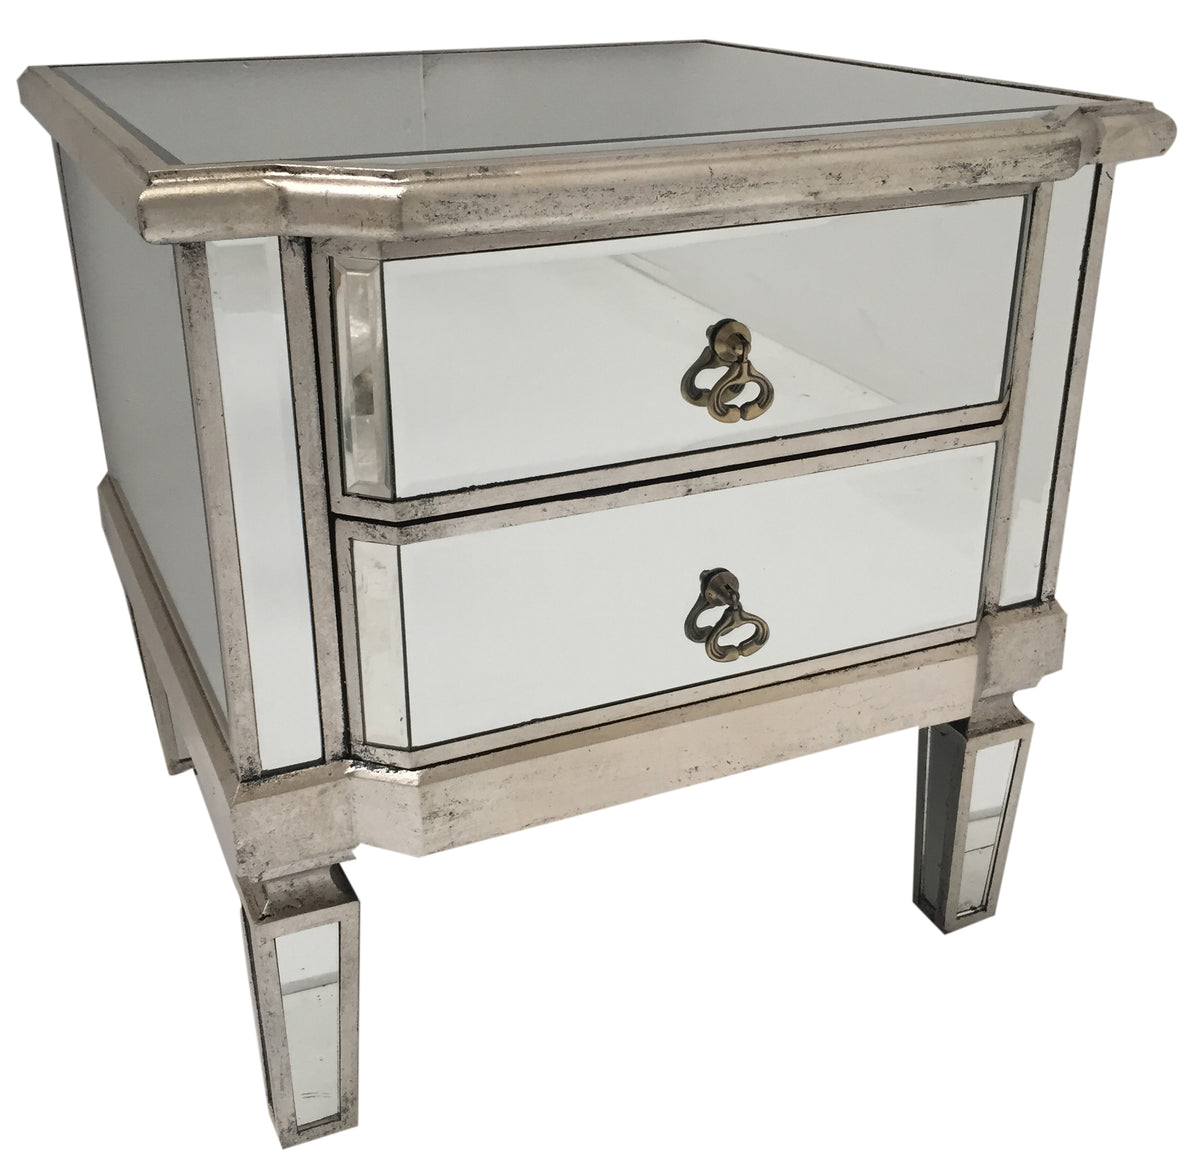 Mirrored Bedside Table 2 Drawers Vintage Silver Finish